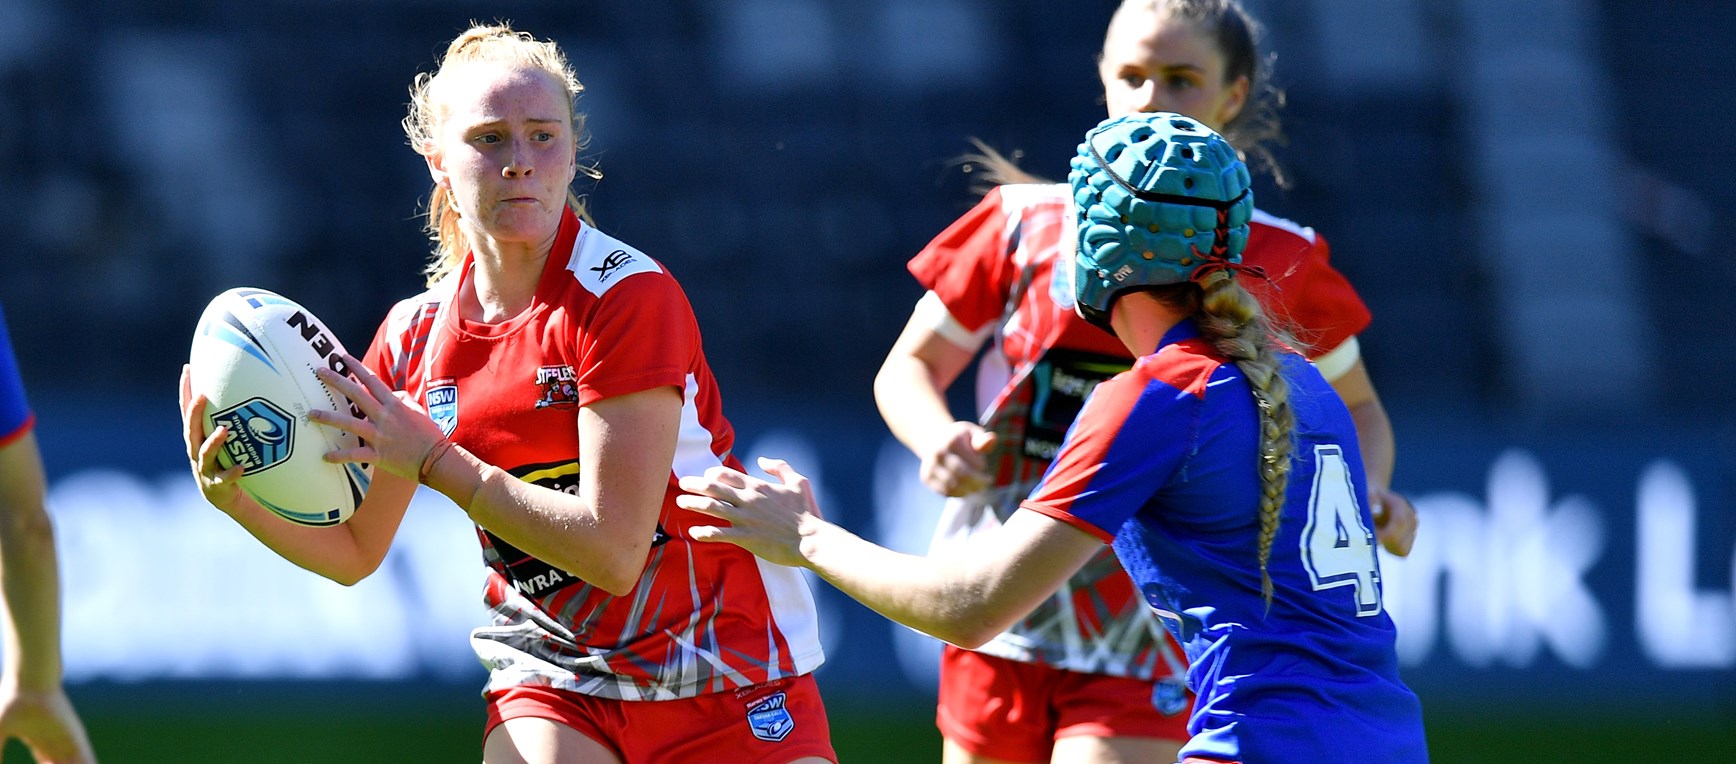 GALLERY | Tarsha Gale Cup Grand Final